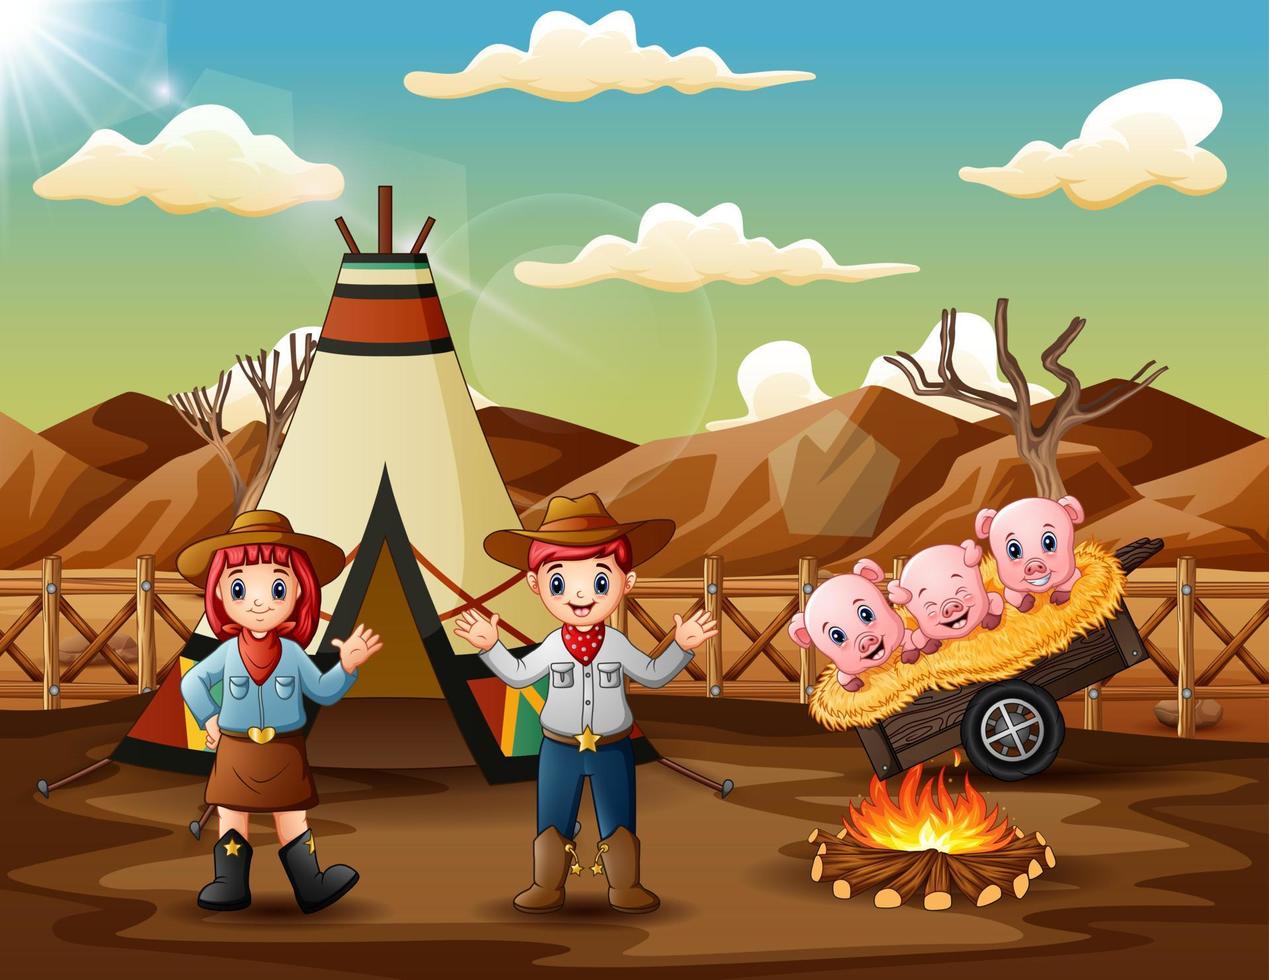 Cowboy and cowgirl and pigs at campsite illustration vector